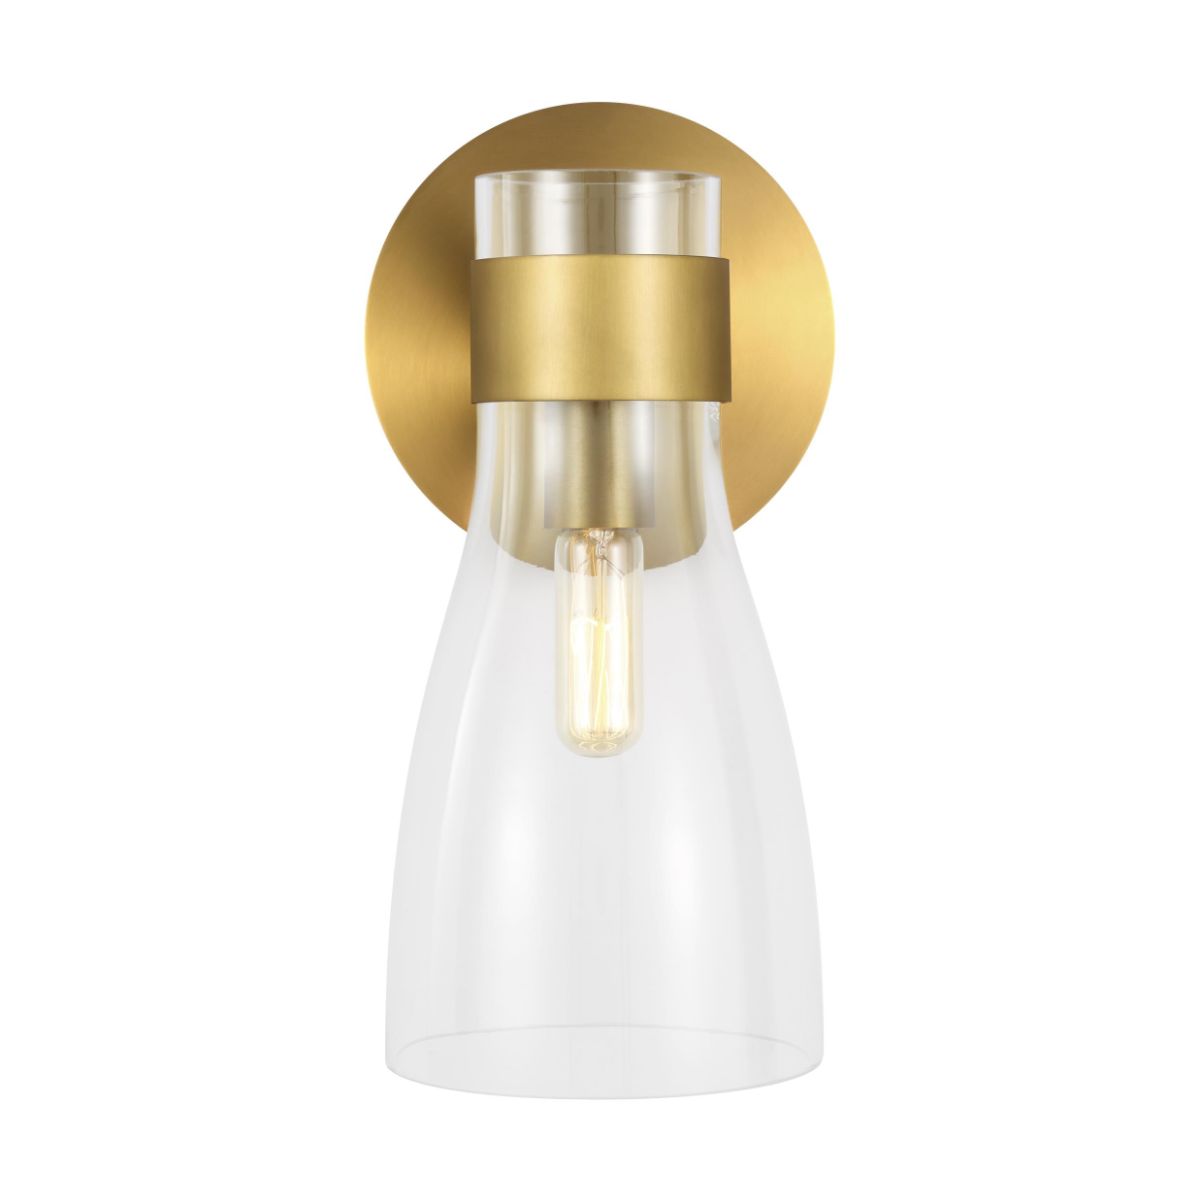 Moritz 11 in. Armed Sconce Burnished Brass finish